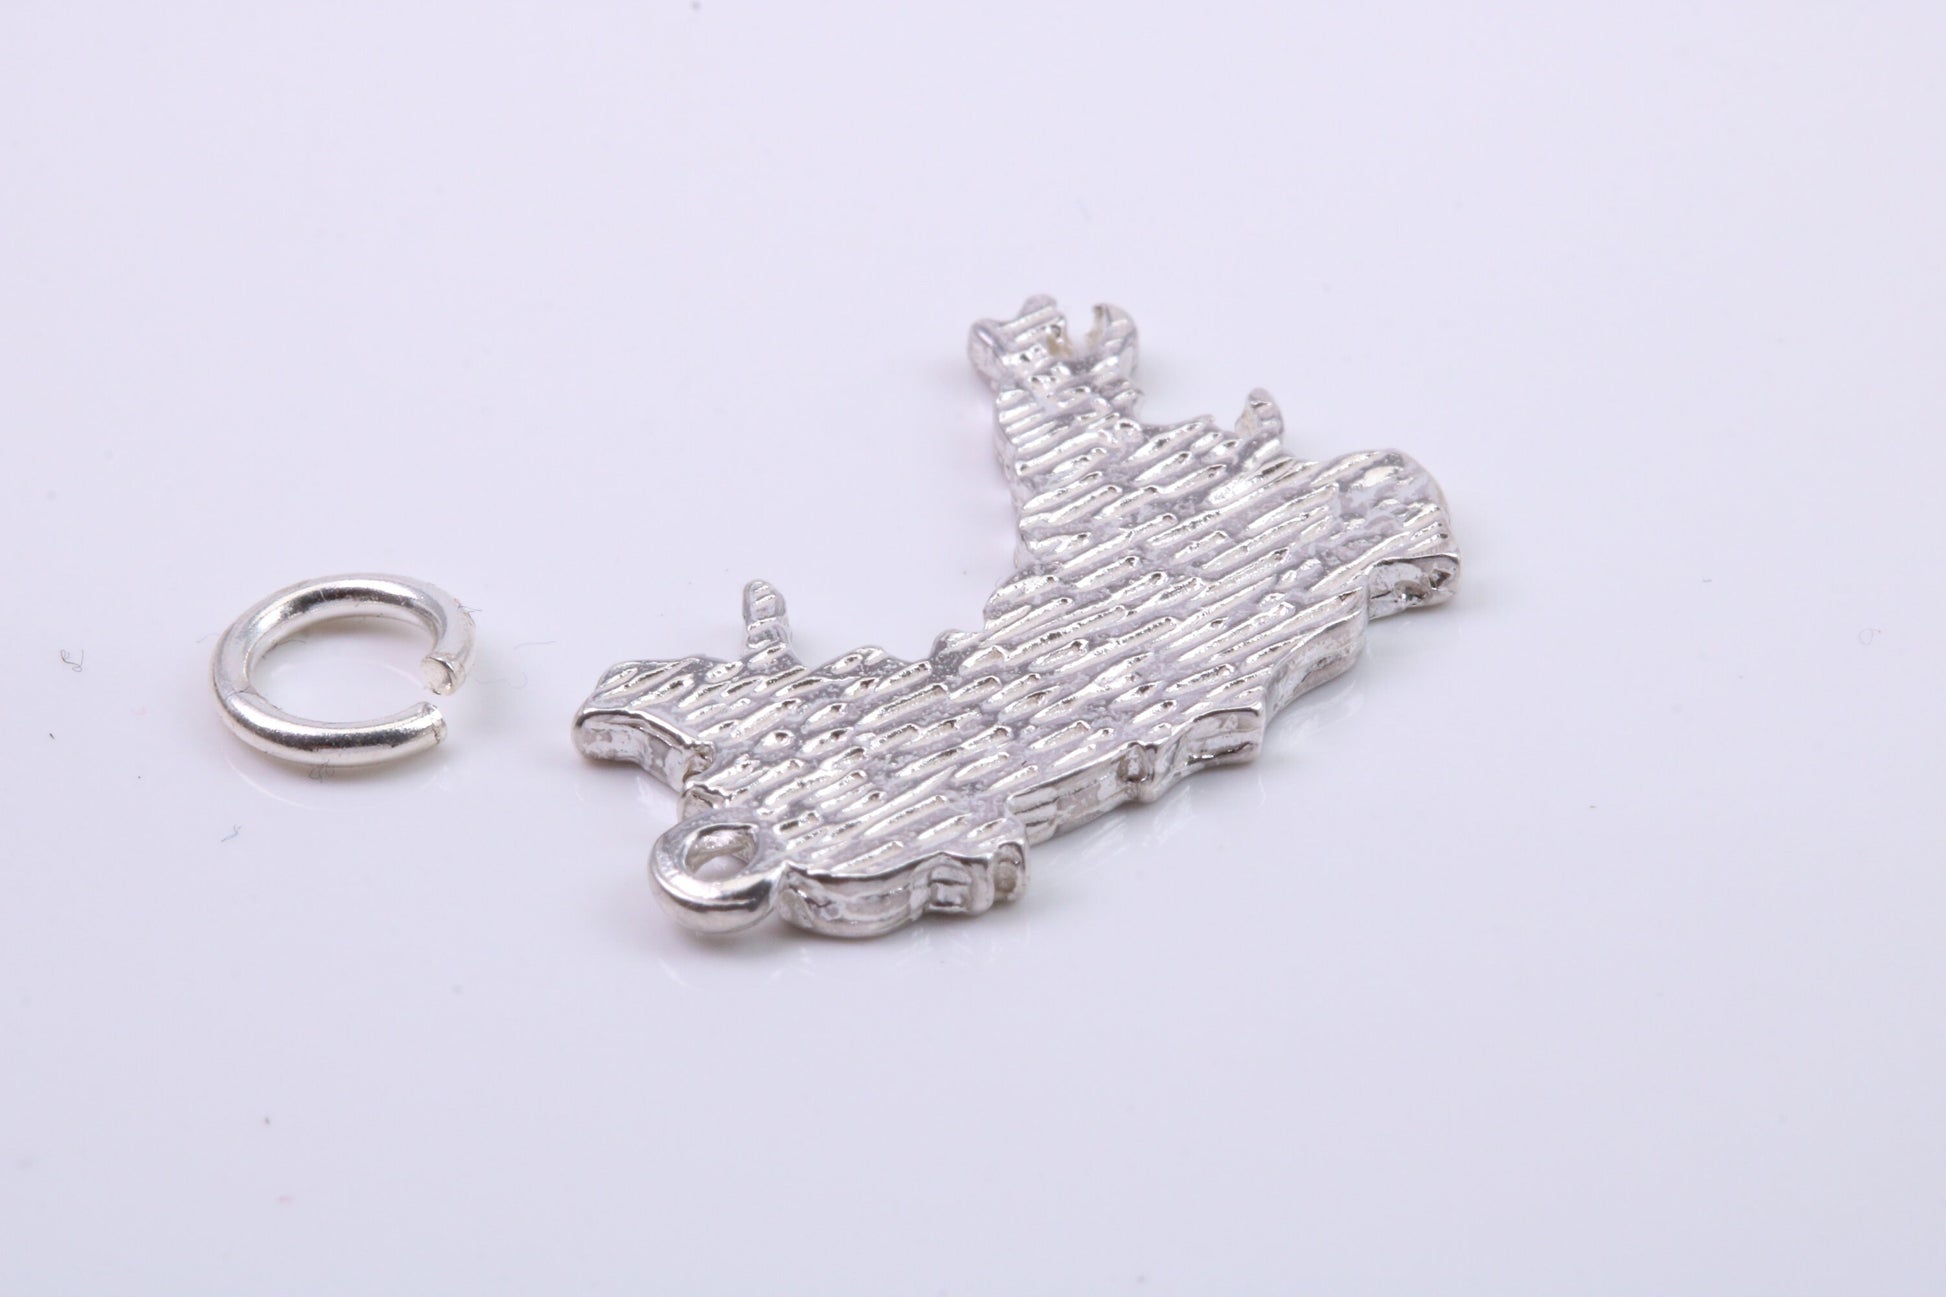 Map of Cymru Charm, Traditional Charm, Made from Solid 925 Grade Sterling Silver, Complete with Attachment Link